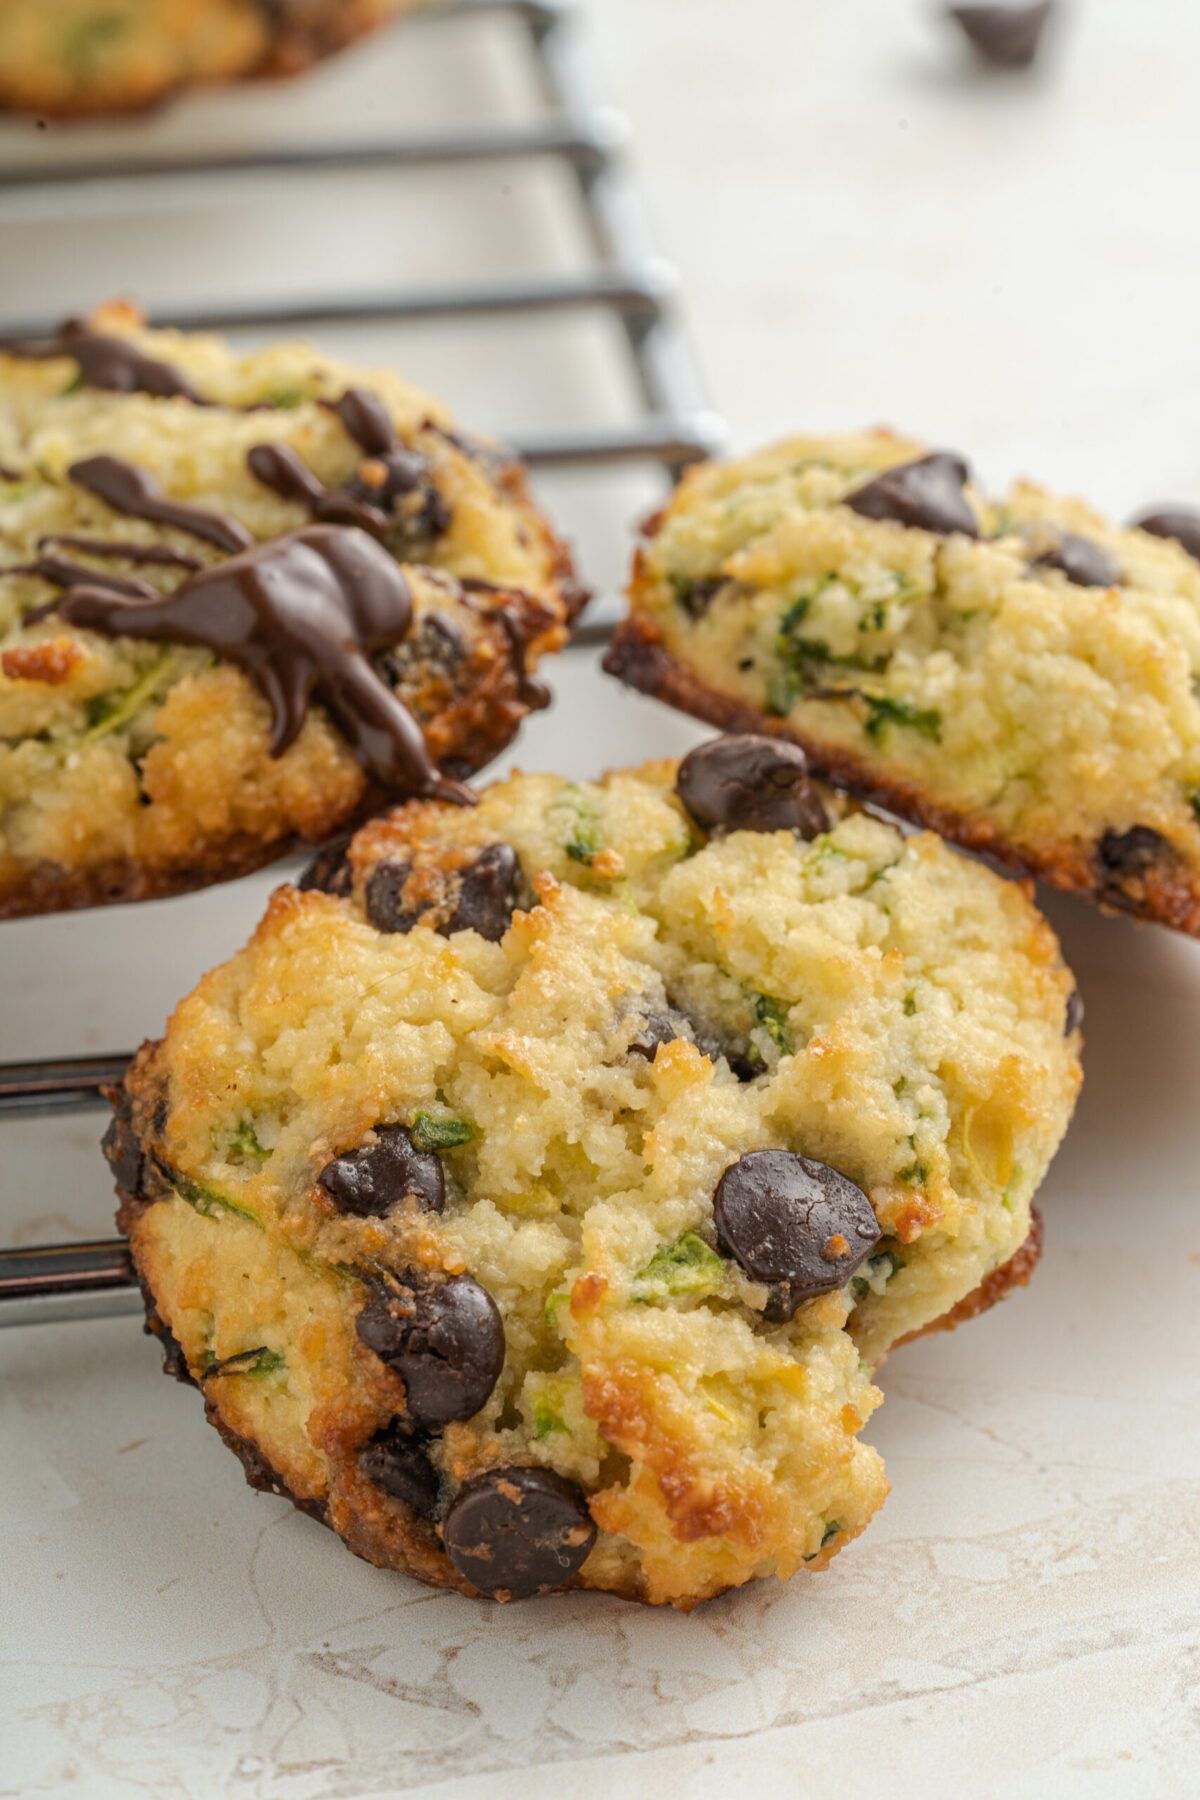 Light, tender and deliciously sweet, these healthy, low carb Chocolate Chip Zucchini Cookies are everyone's favorite!